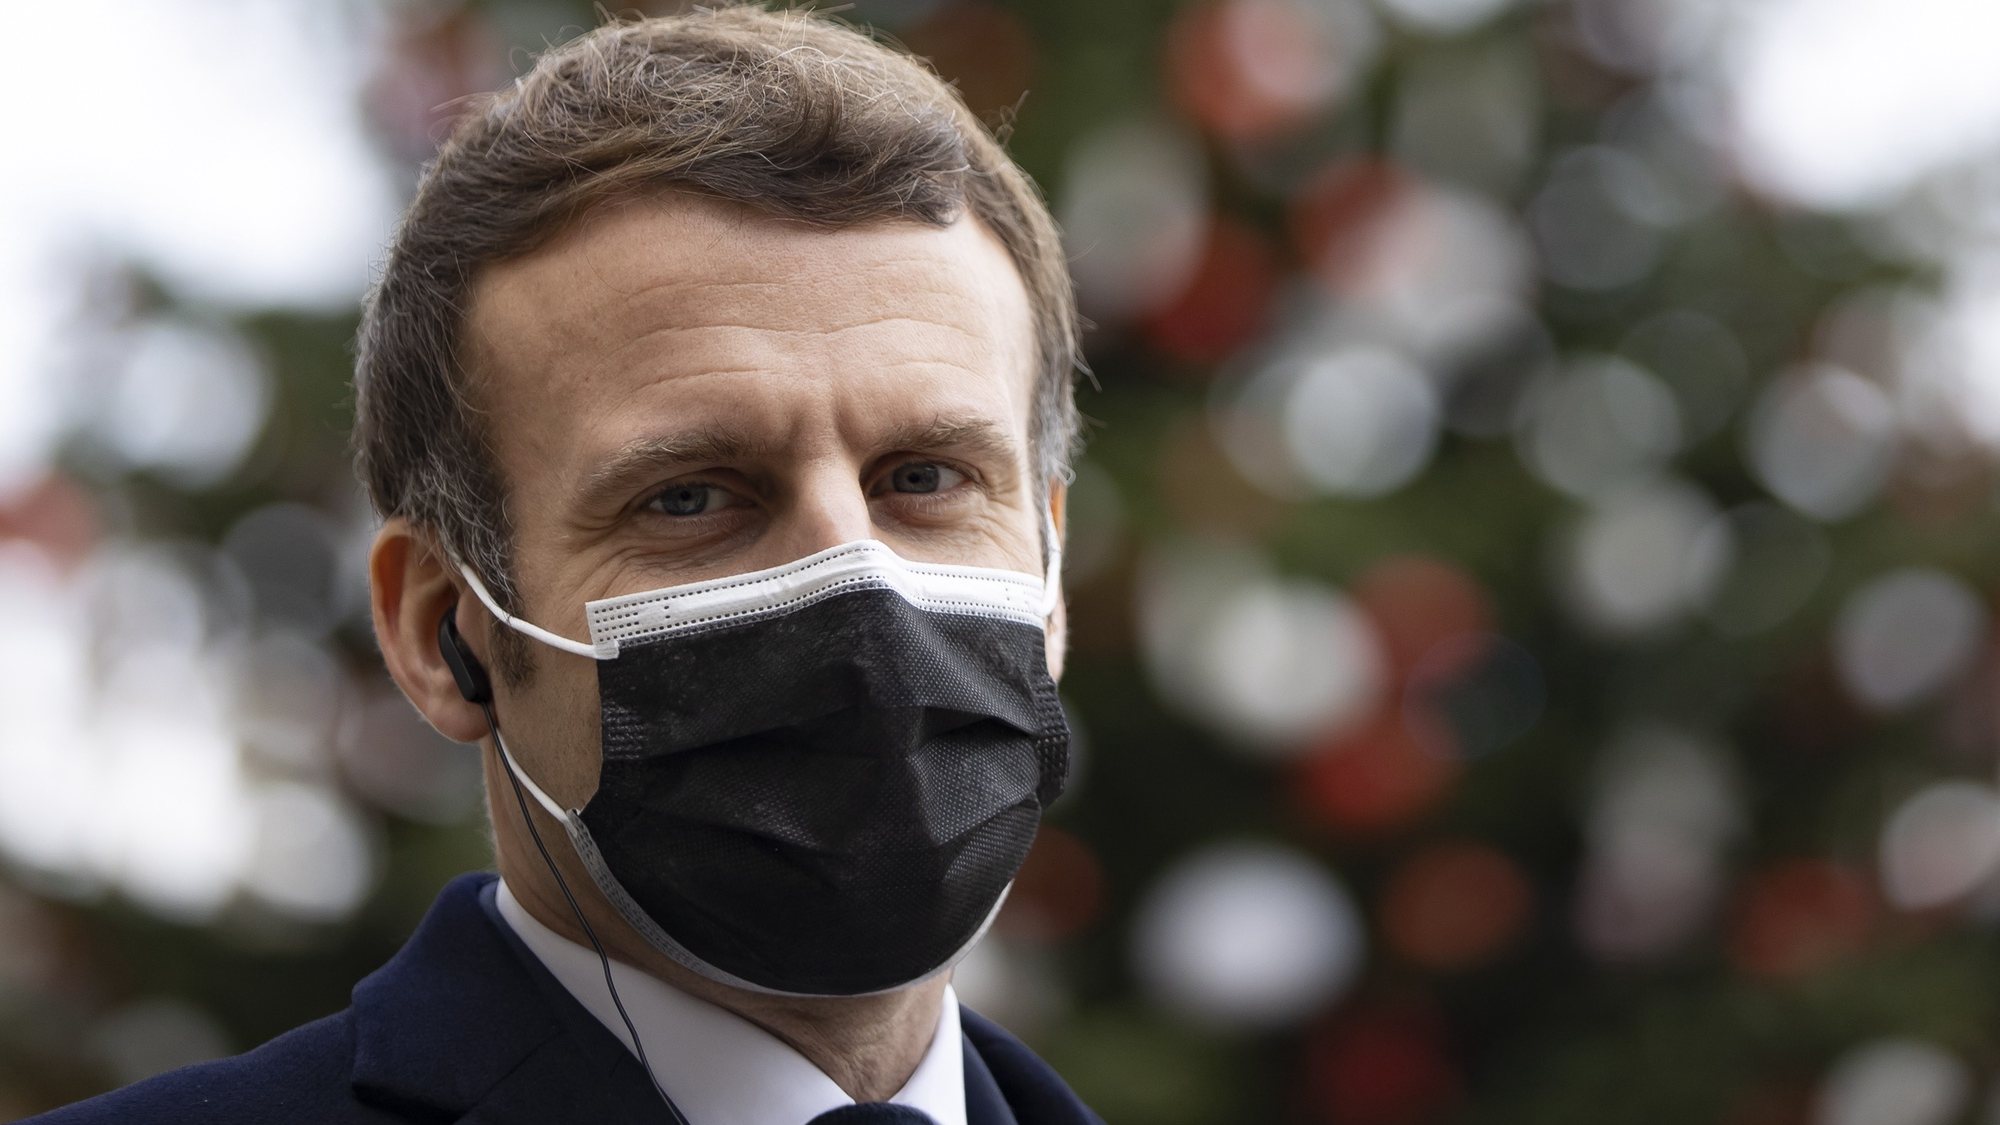 epa08889601 French President Emmanuel Macron seen at the Elysee Palace in Paris, France, 16 December 2020 (issued 17 December 2020). According to a statement by the Elysee Palace on 17 December 2020, French President was tested positive for coronavirus Covid-19. Macron will stay in isolation but will continue to perform his duties.  EPA/IAN LANGSDON